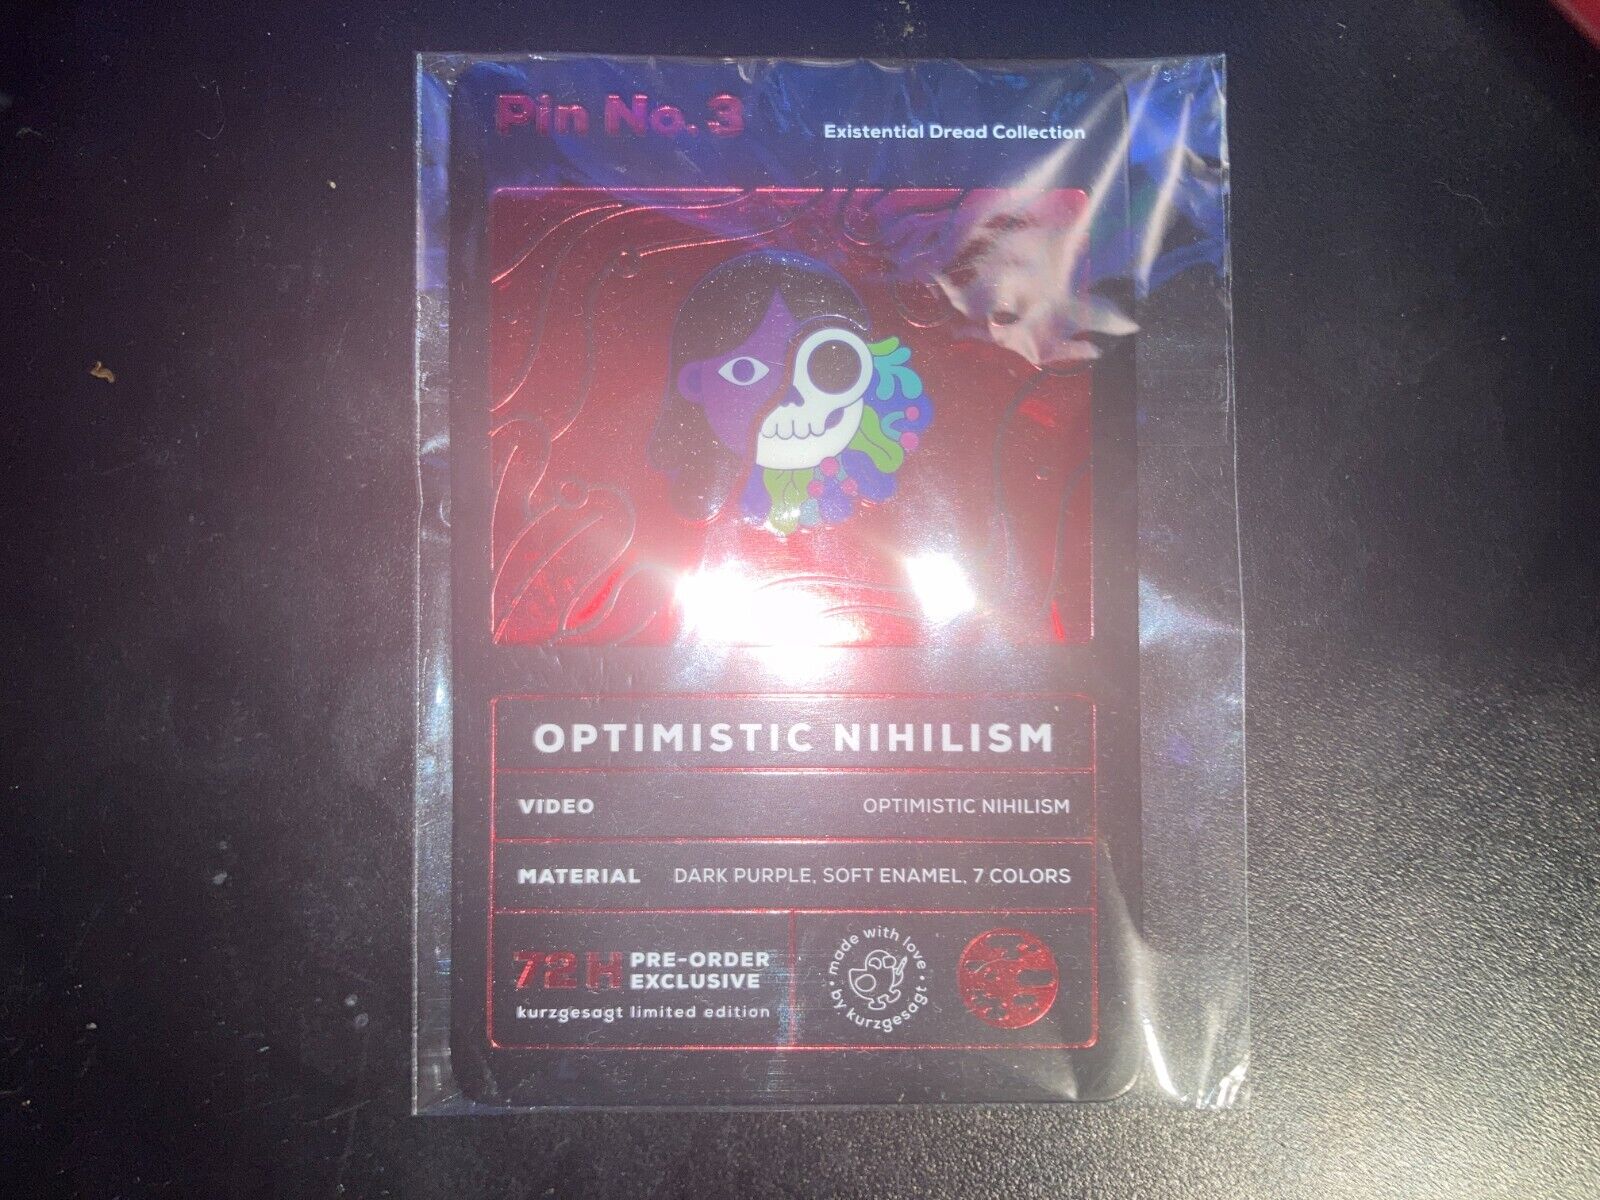 BRAND NEW LIMITED EDITION Kurzgesagt Existential Dread Pin 3 Optimistic Nihilism